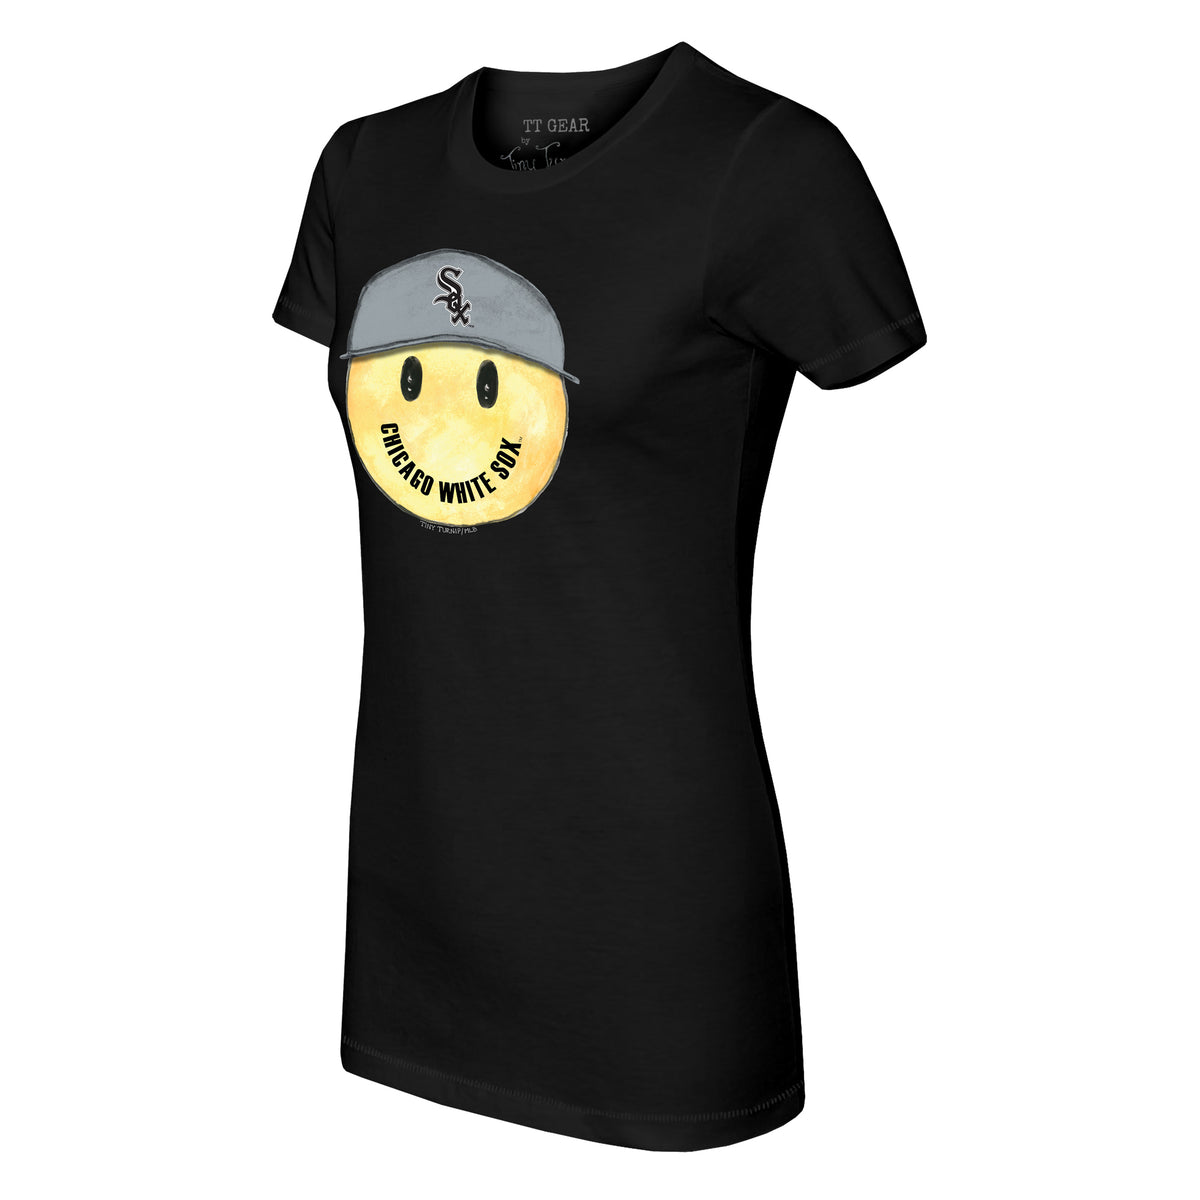 Chicago White Sox Smiley Tee Shirt